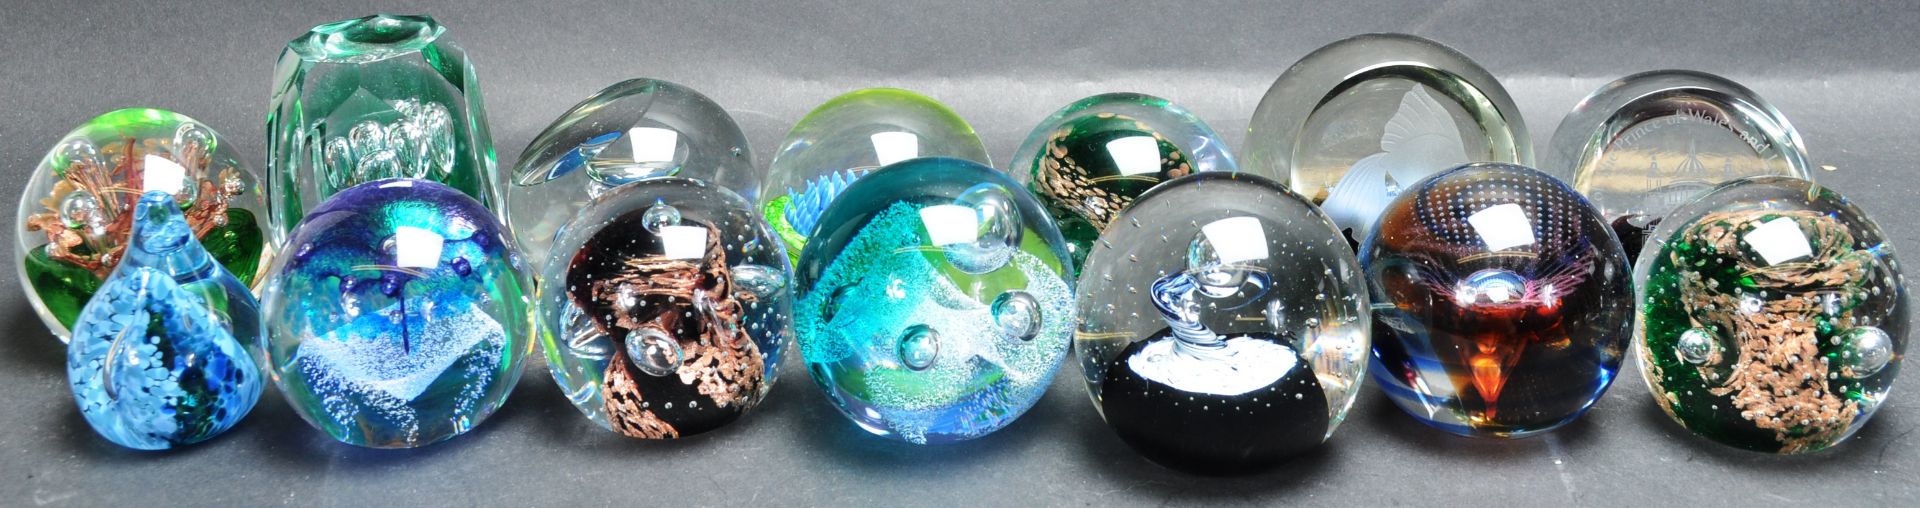 COLLECTION OF 20TH CENTURY CAITHNESS PAPERWEIGHTS.